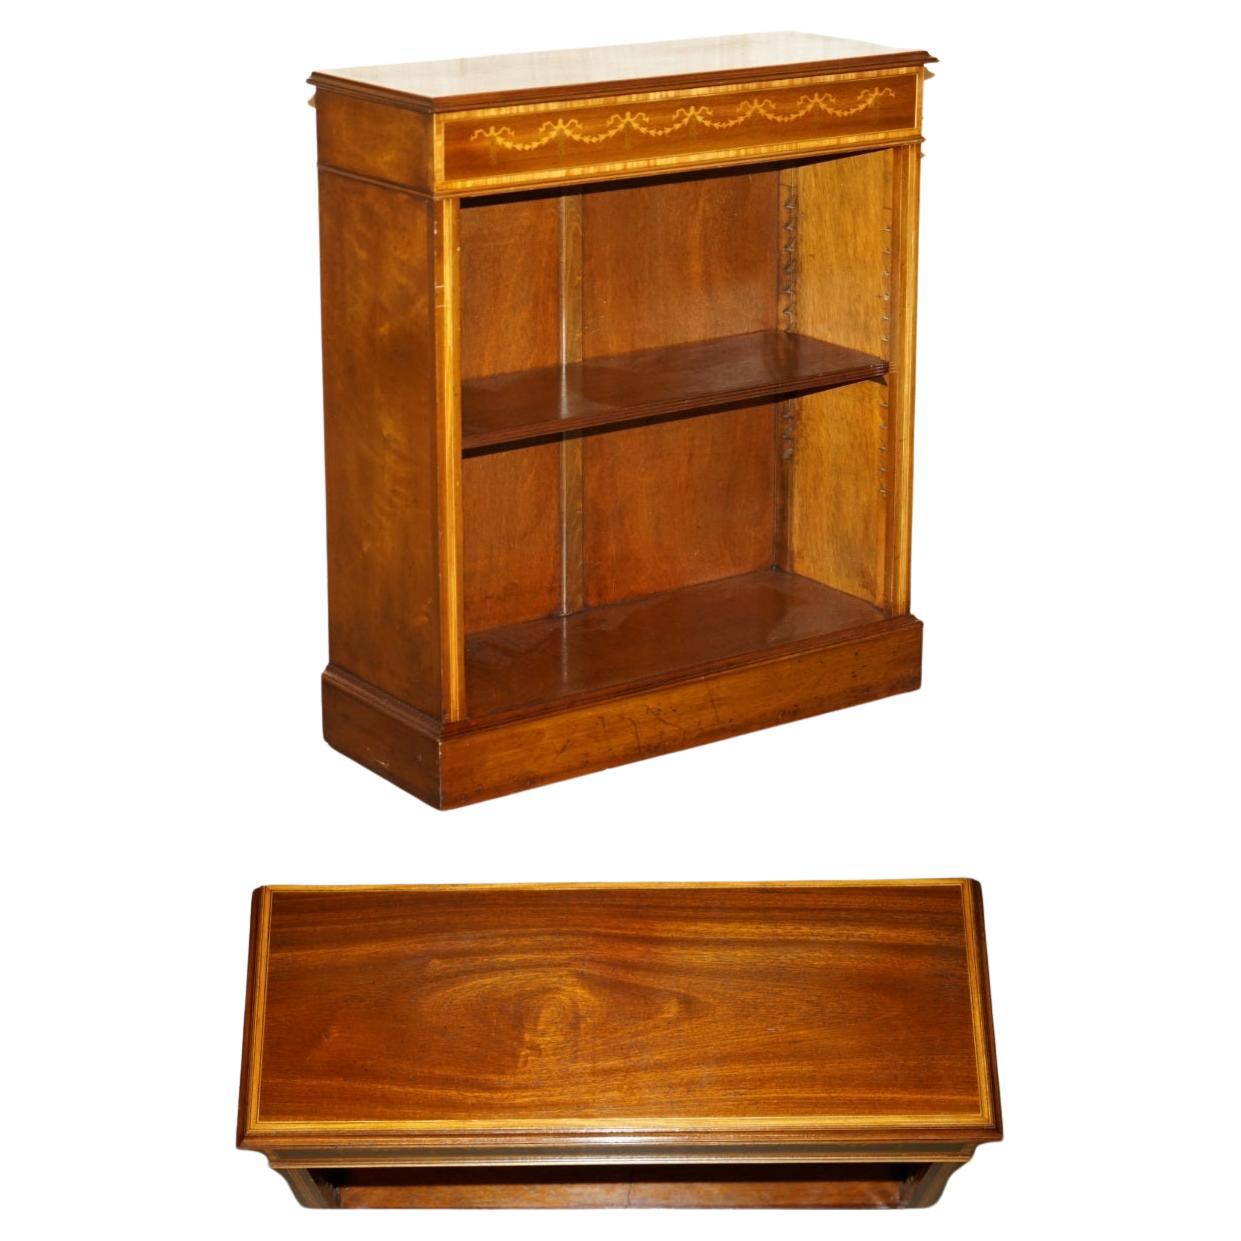 Exquisite BRiGHTS OF NETTLEBED SHERATON REVIVAL DWARF OPEN BOOKCASE